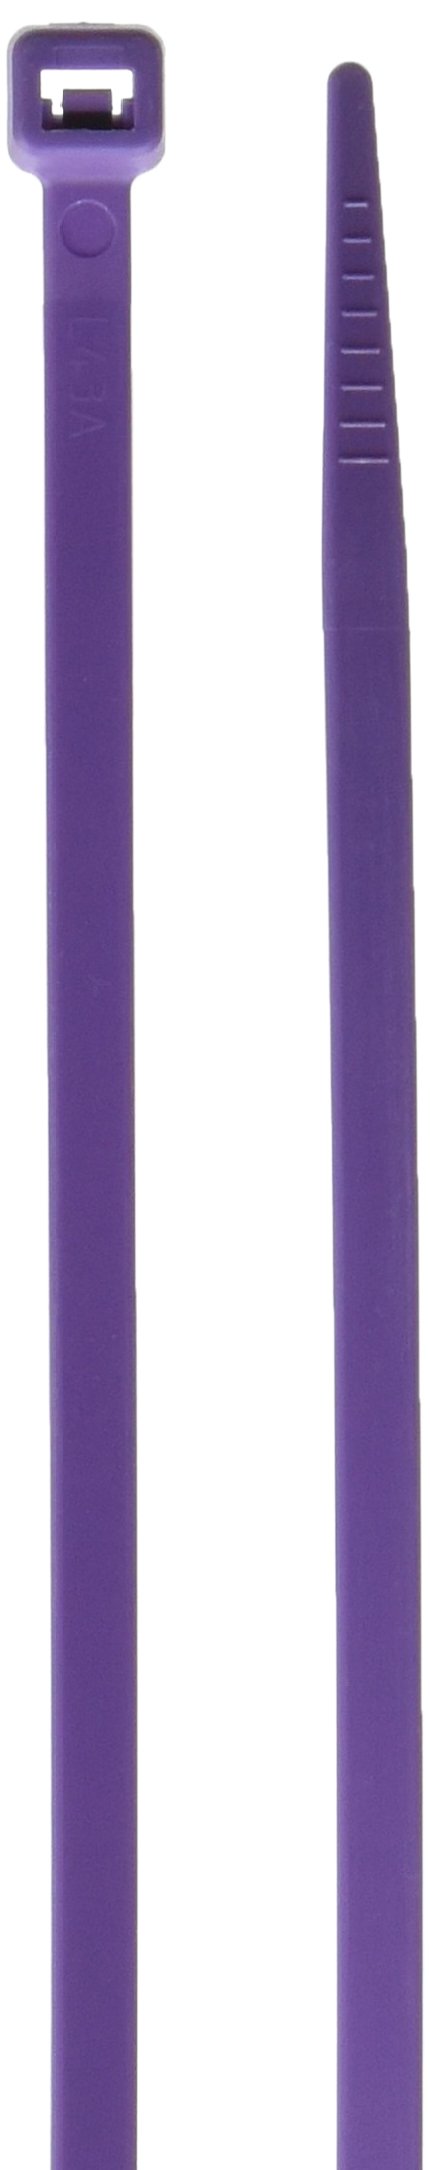  [AUSTRALIA] - Morris 20619 Nylon Cable Tie with 50-Pound Tensile Strength, 8-Inch Length, Purple, 100-Pack